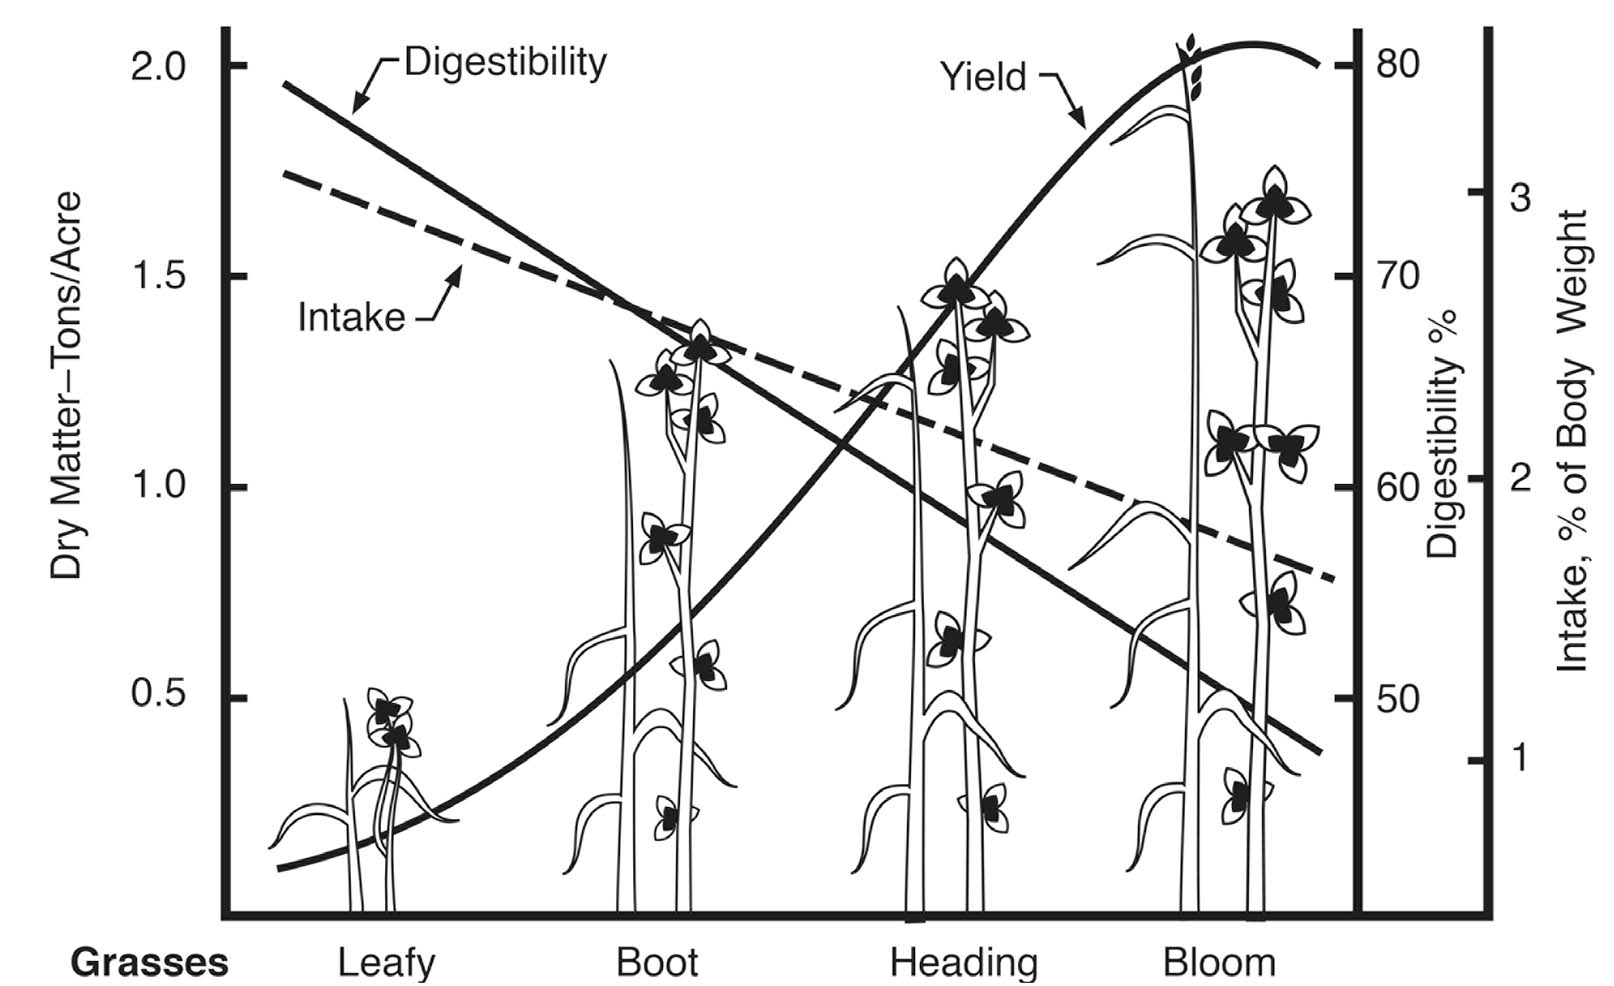 Fig. 03: Illustration showing relative yield, quality, and intake of grasses and legumes.